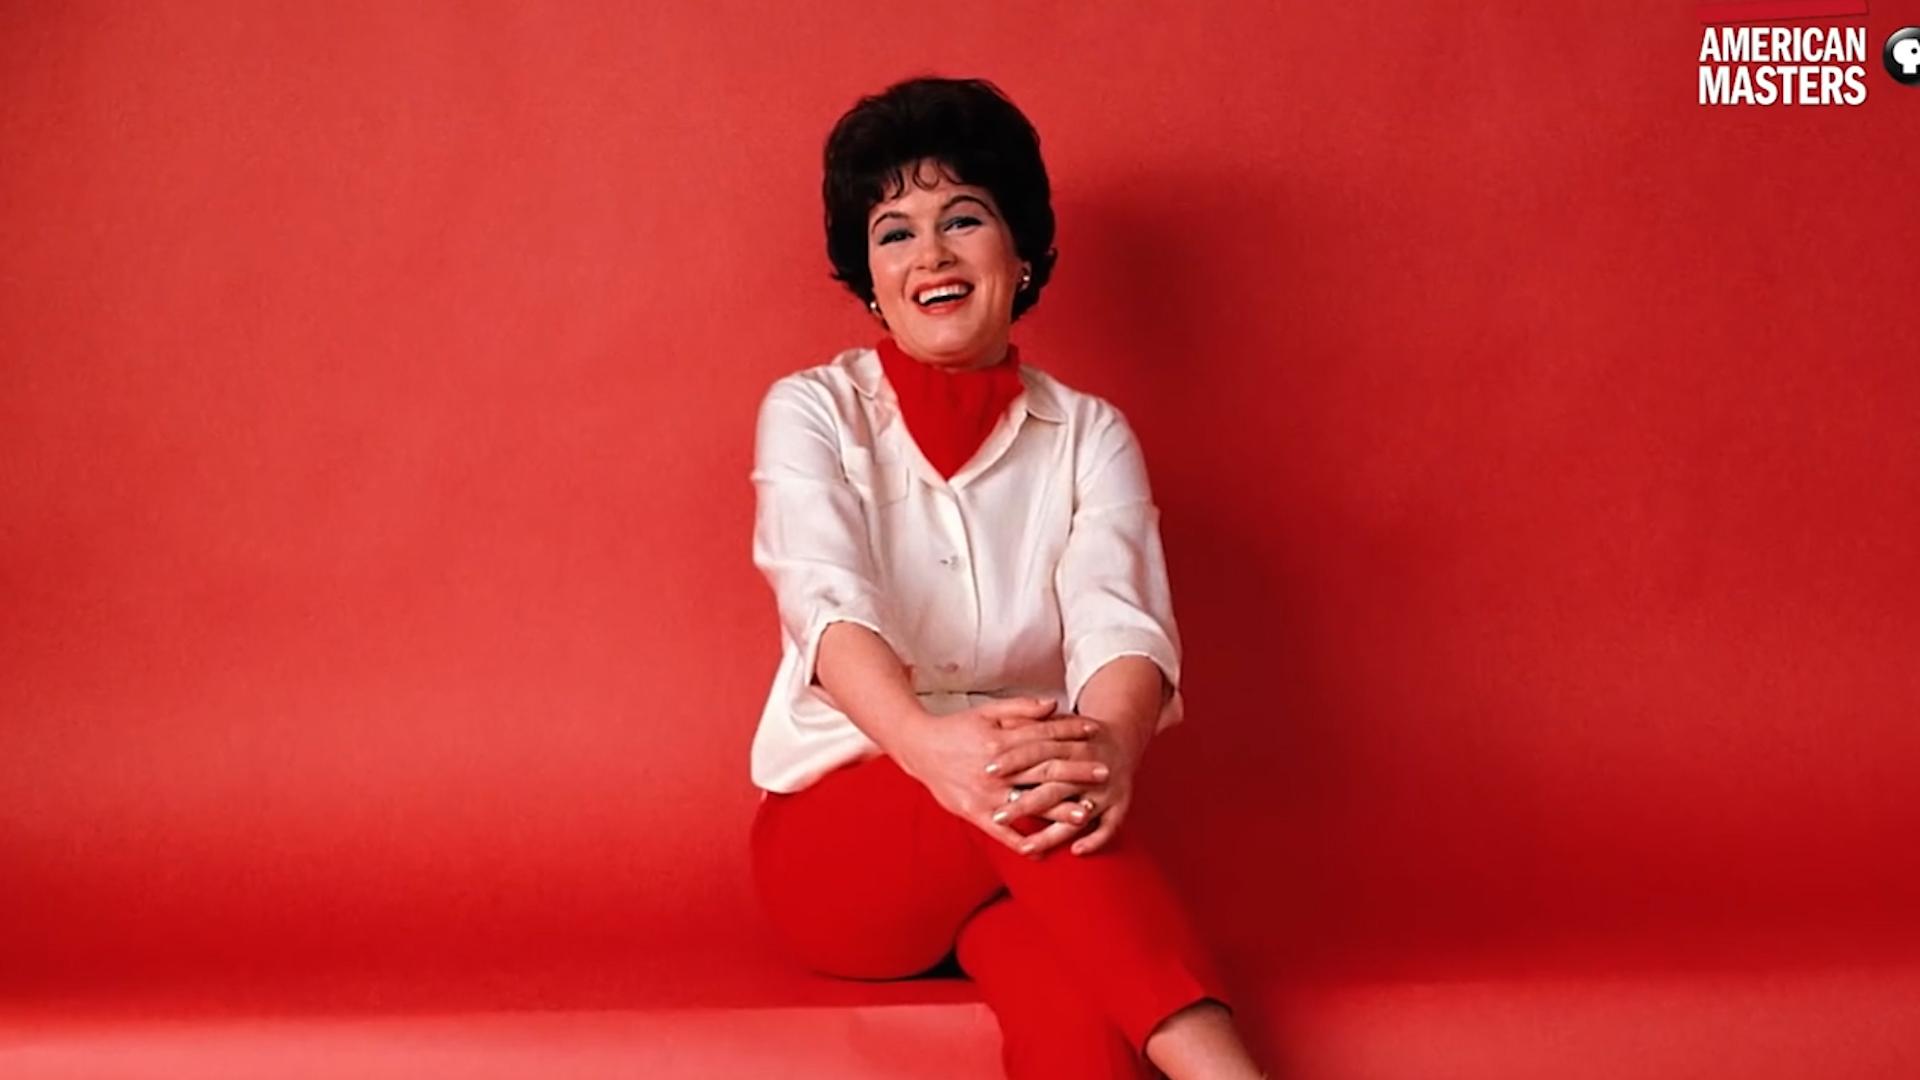 March 2017: “PATSY CLINE: AMERICAN MASTERS”